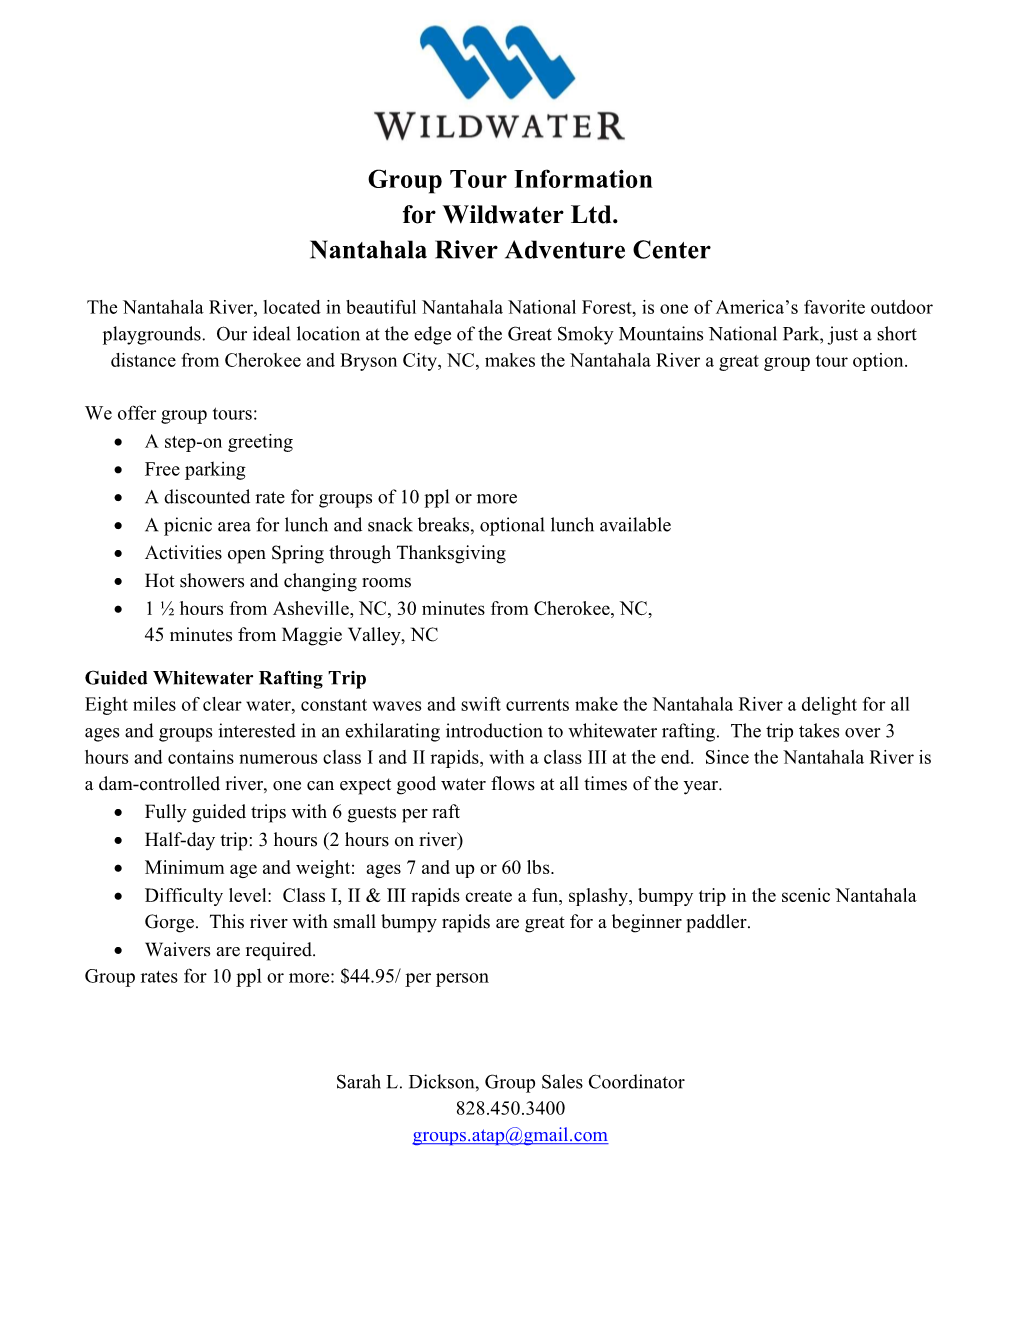 Group Tour Information for the Wildwater Nantahala River